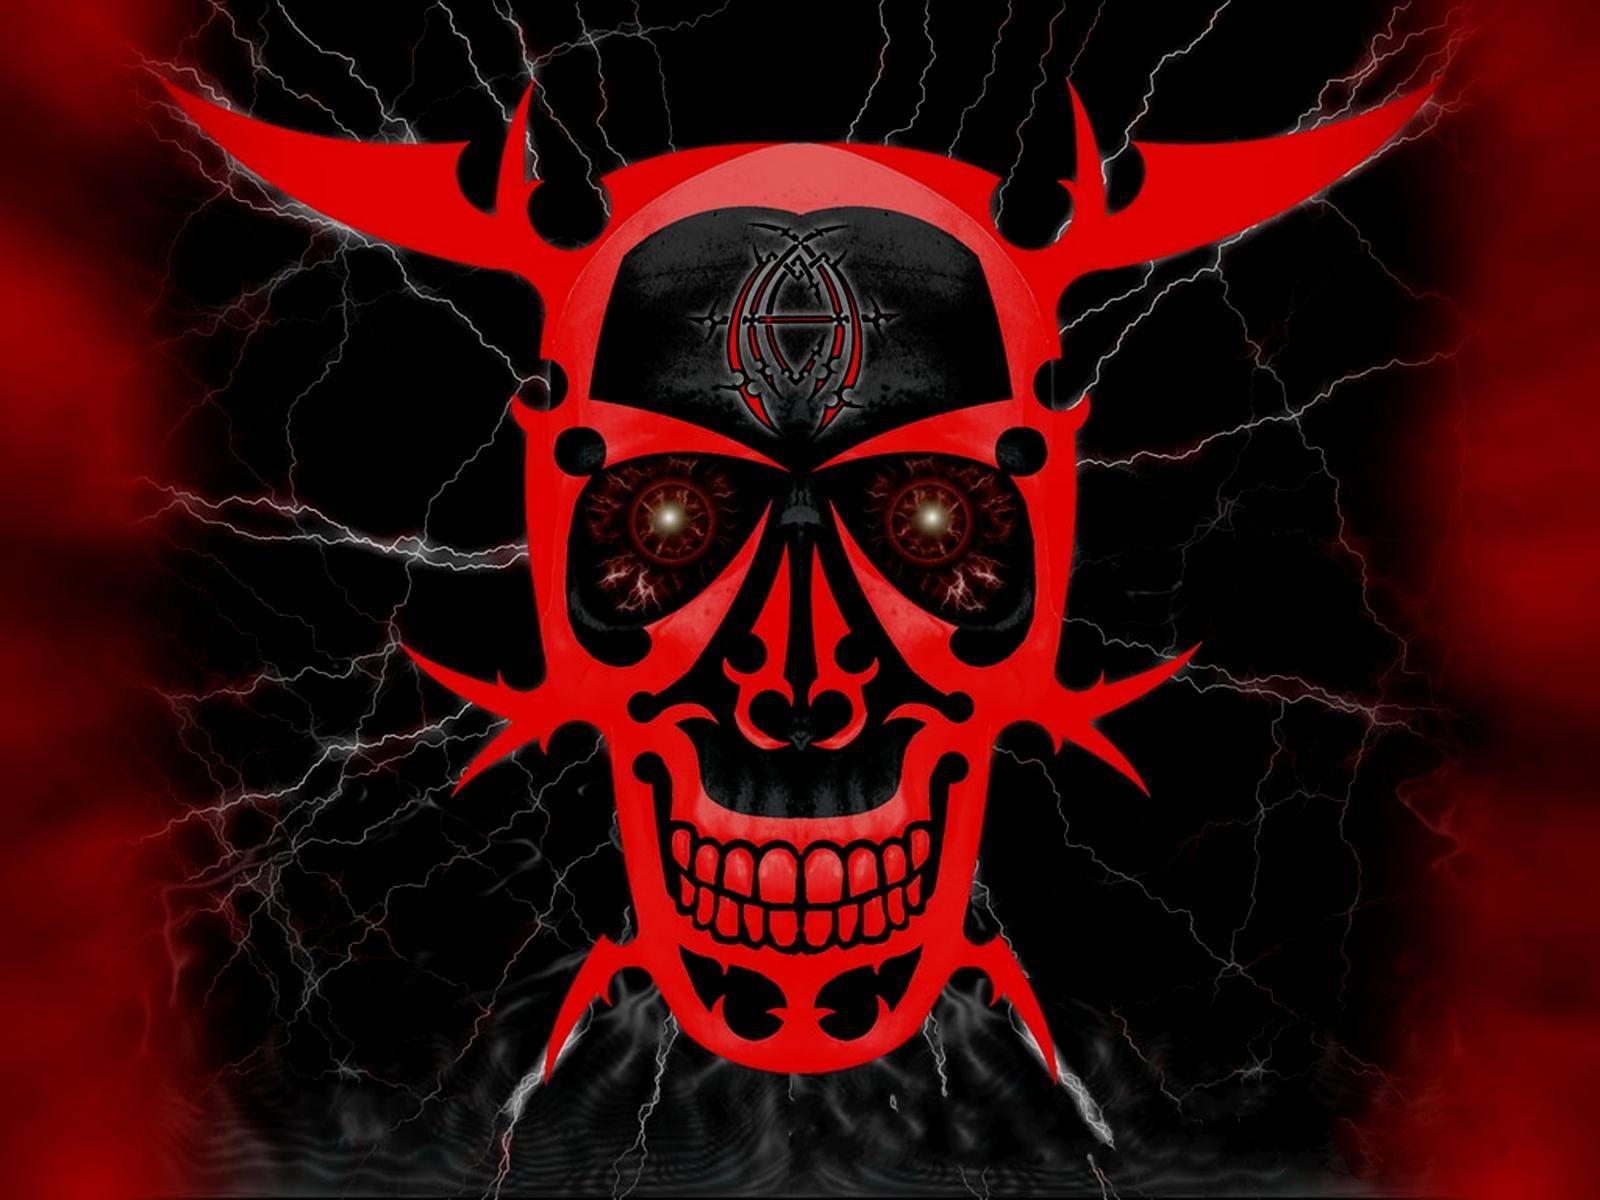 Android Skull Wallpaper 1600x1200. Download wallpaper page